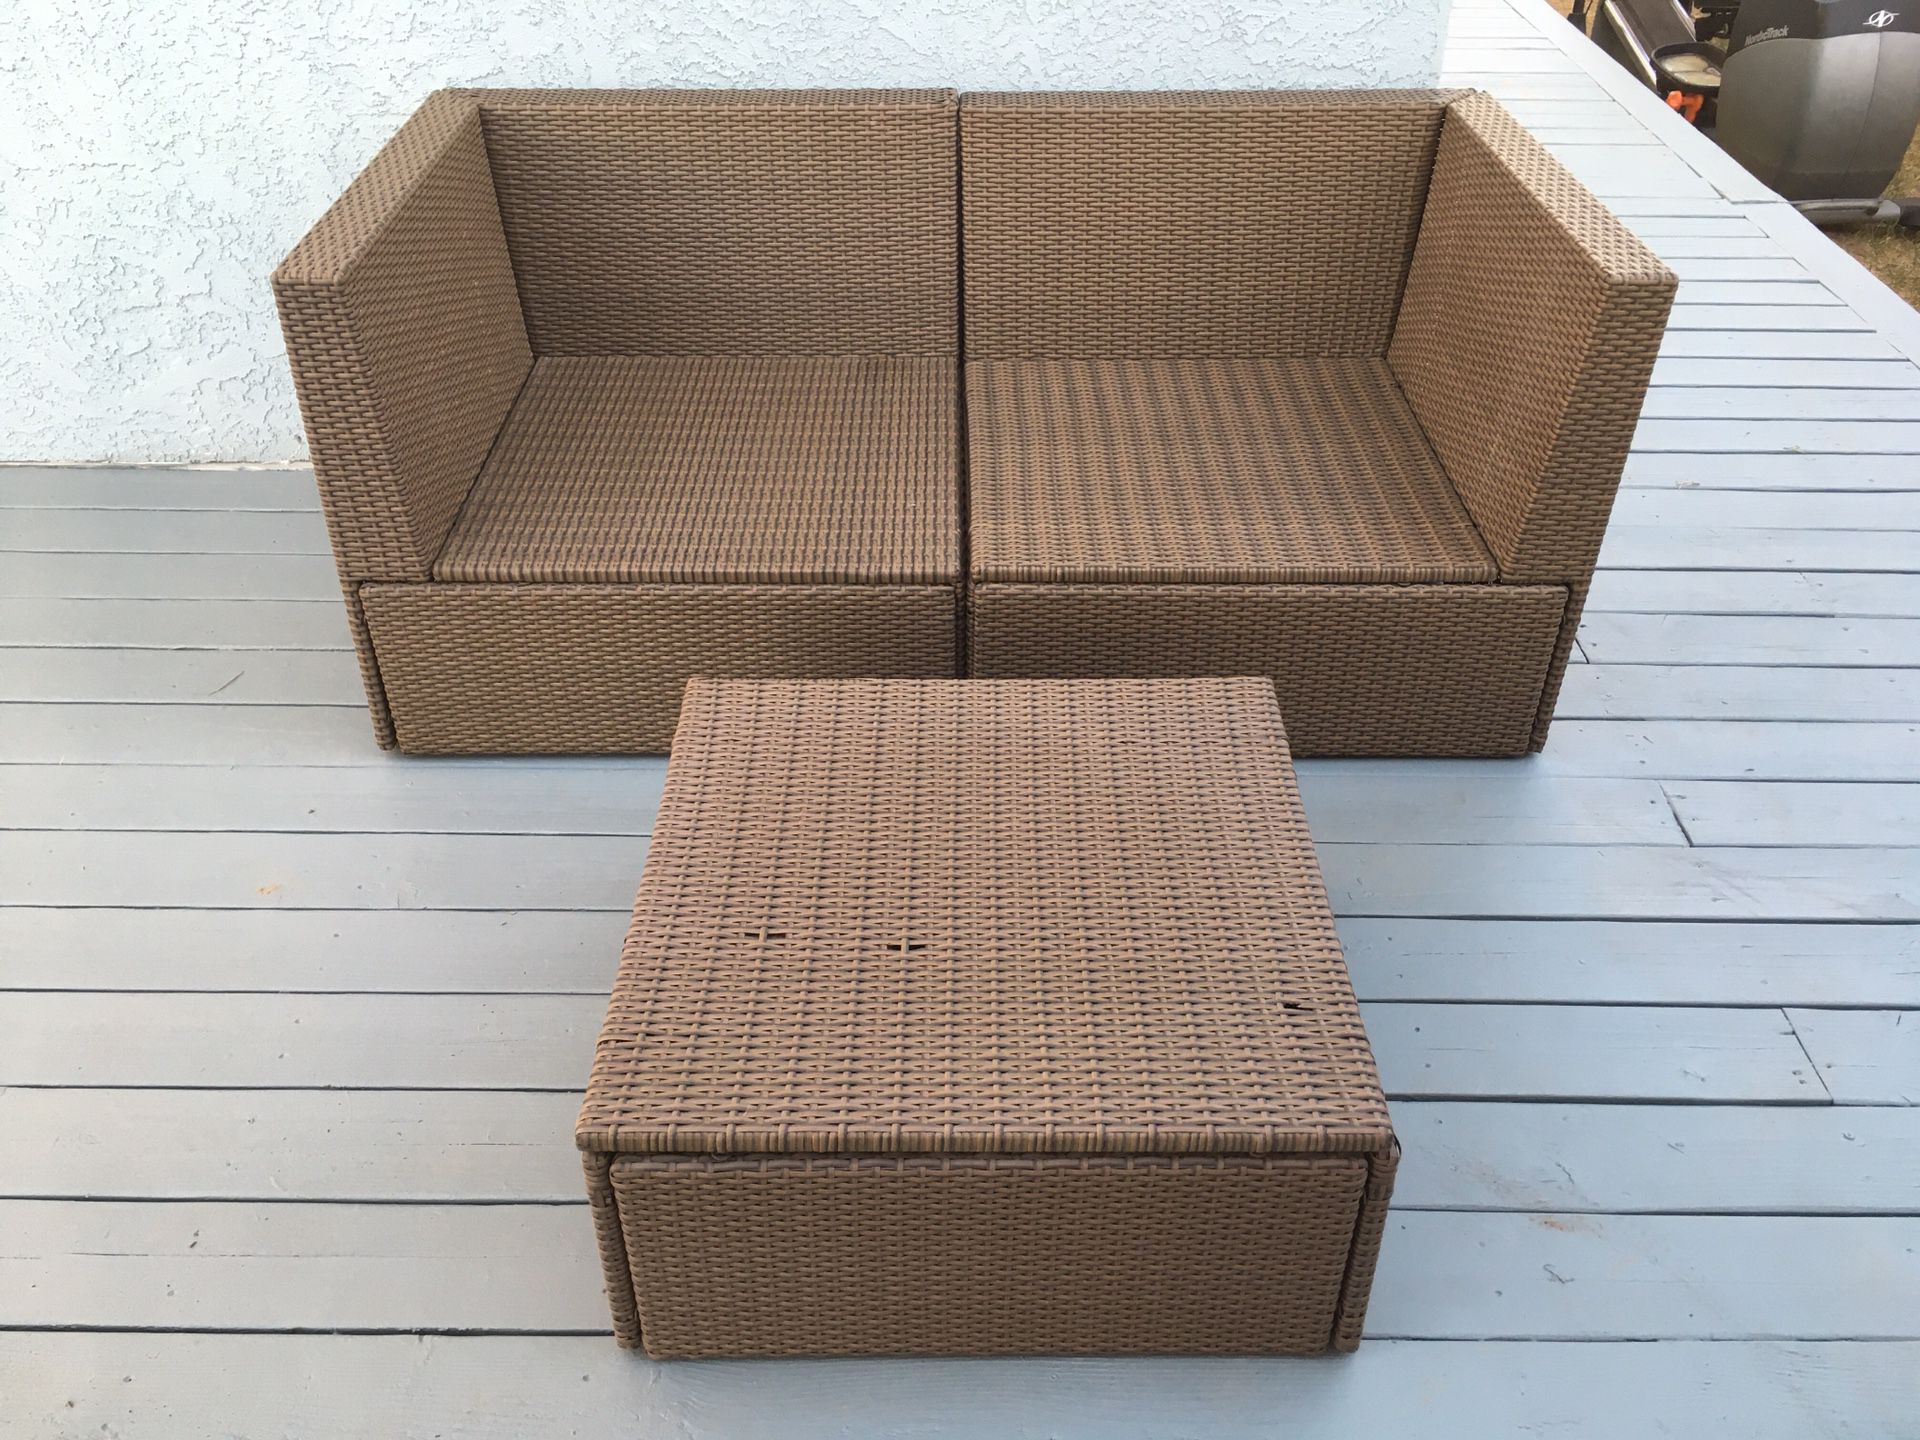 Ikea solleron patio furniture corner pieces and table